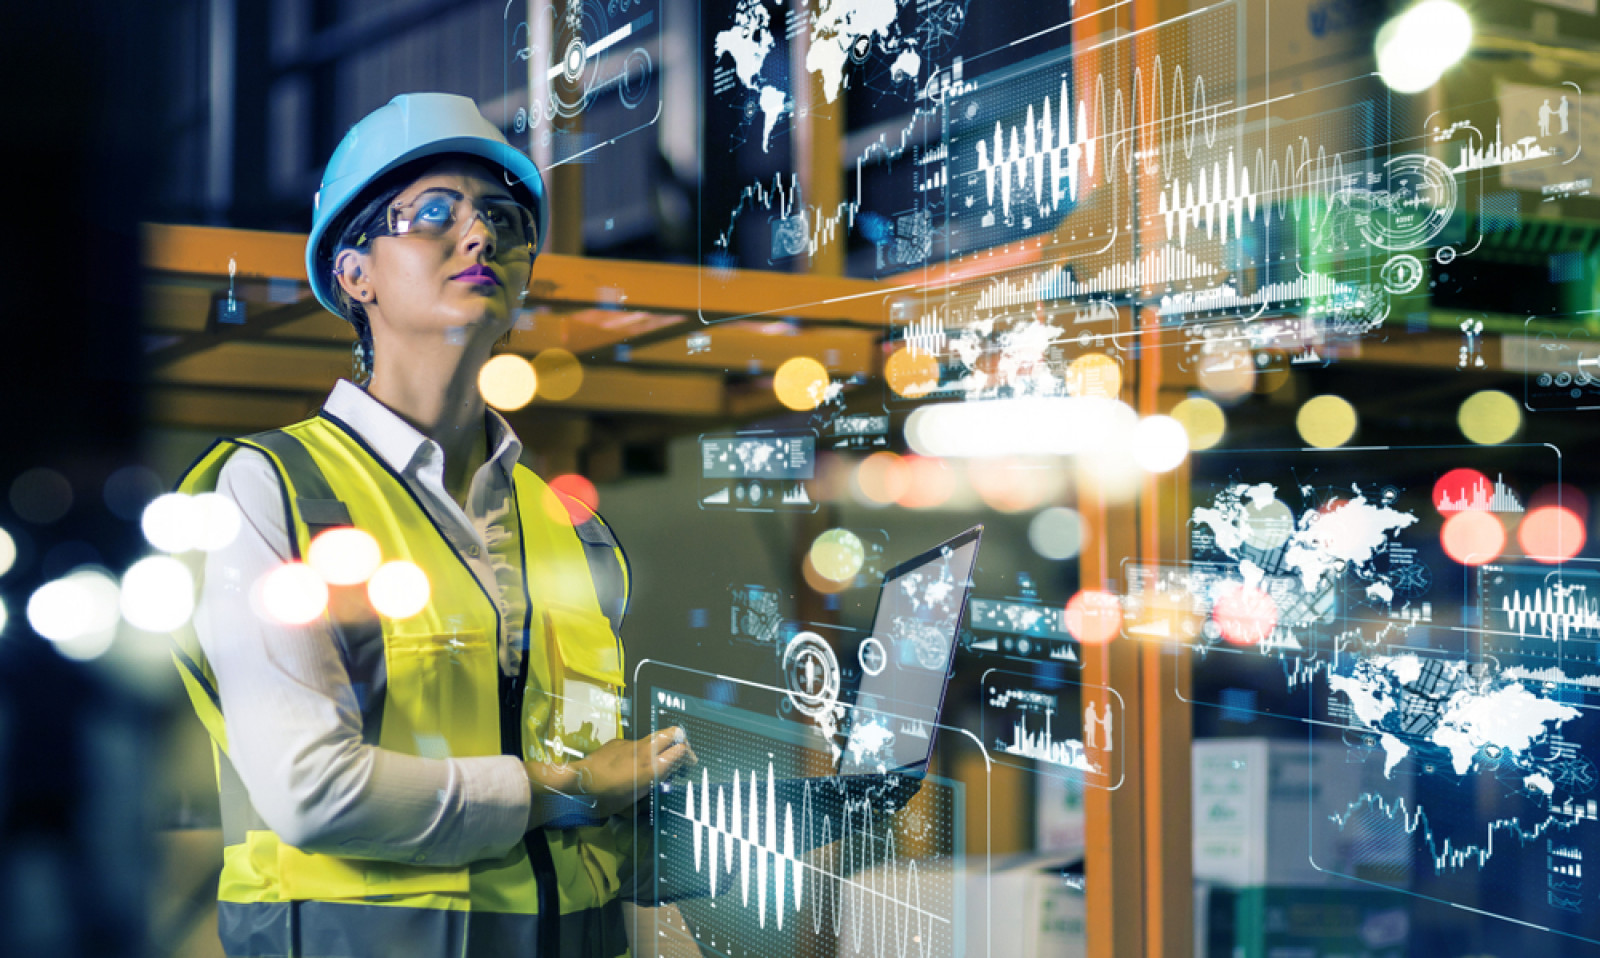 The benefits of achieving real-time manufacturing visibility for increased performance and global competitiveness